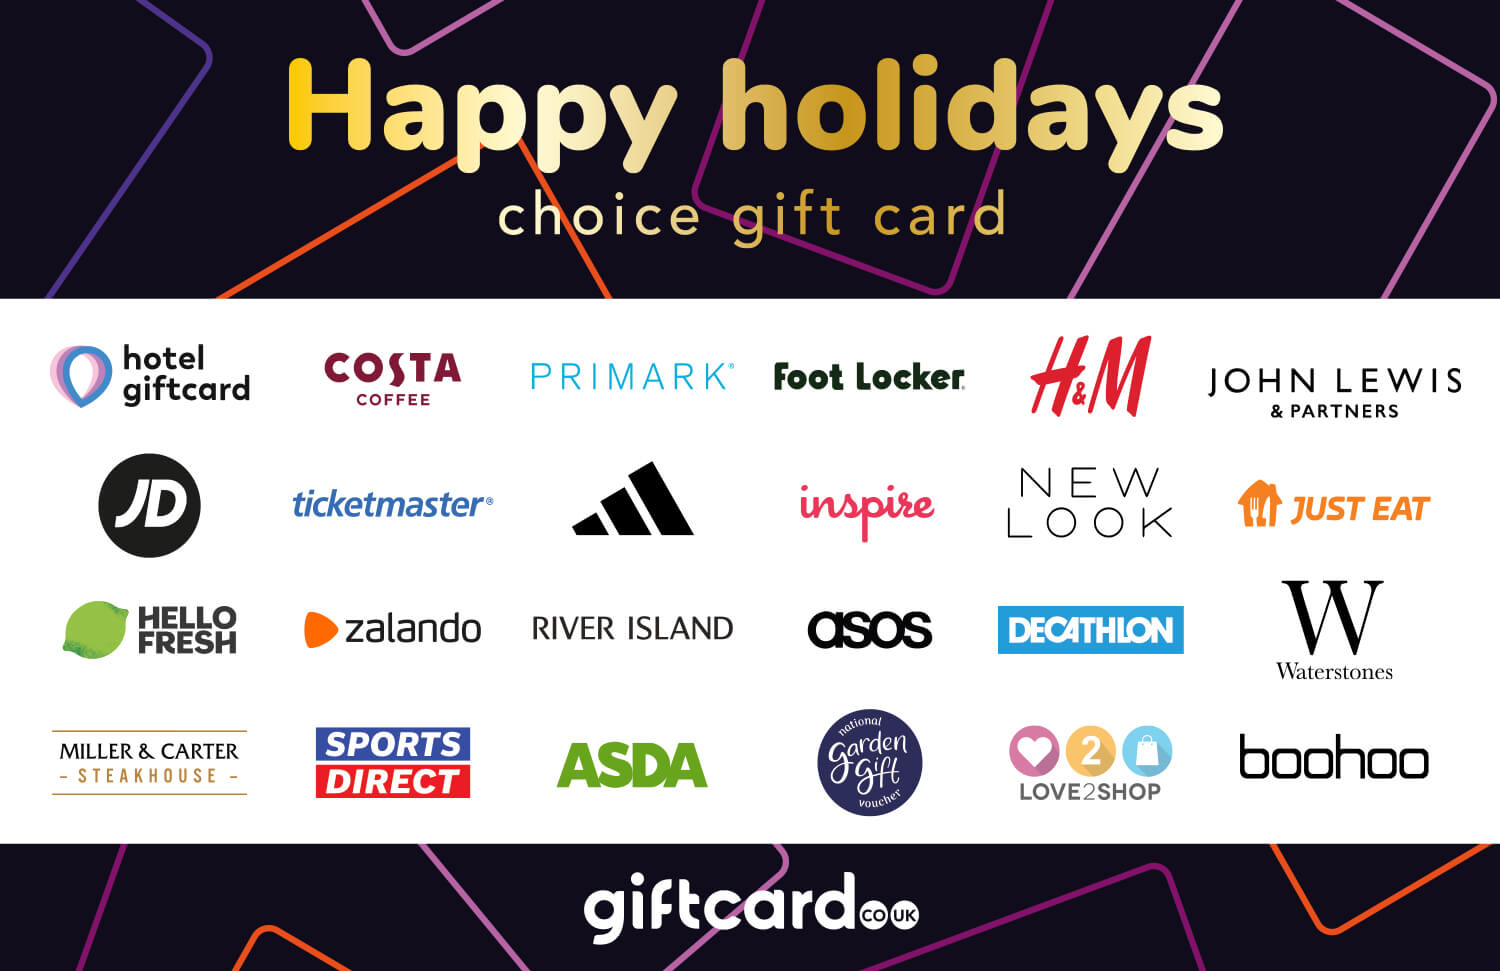 Happy holidays gift card